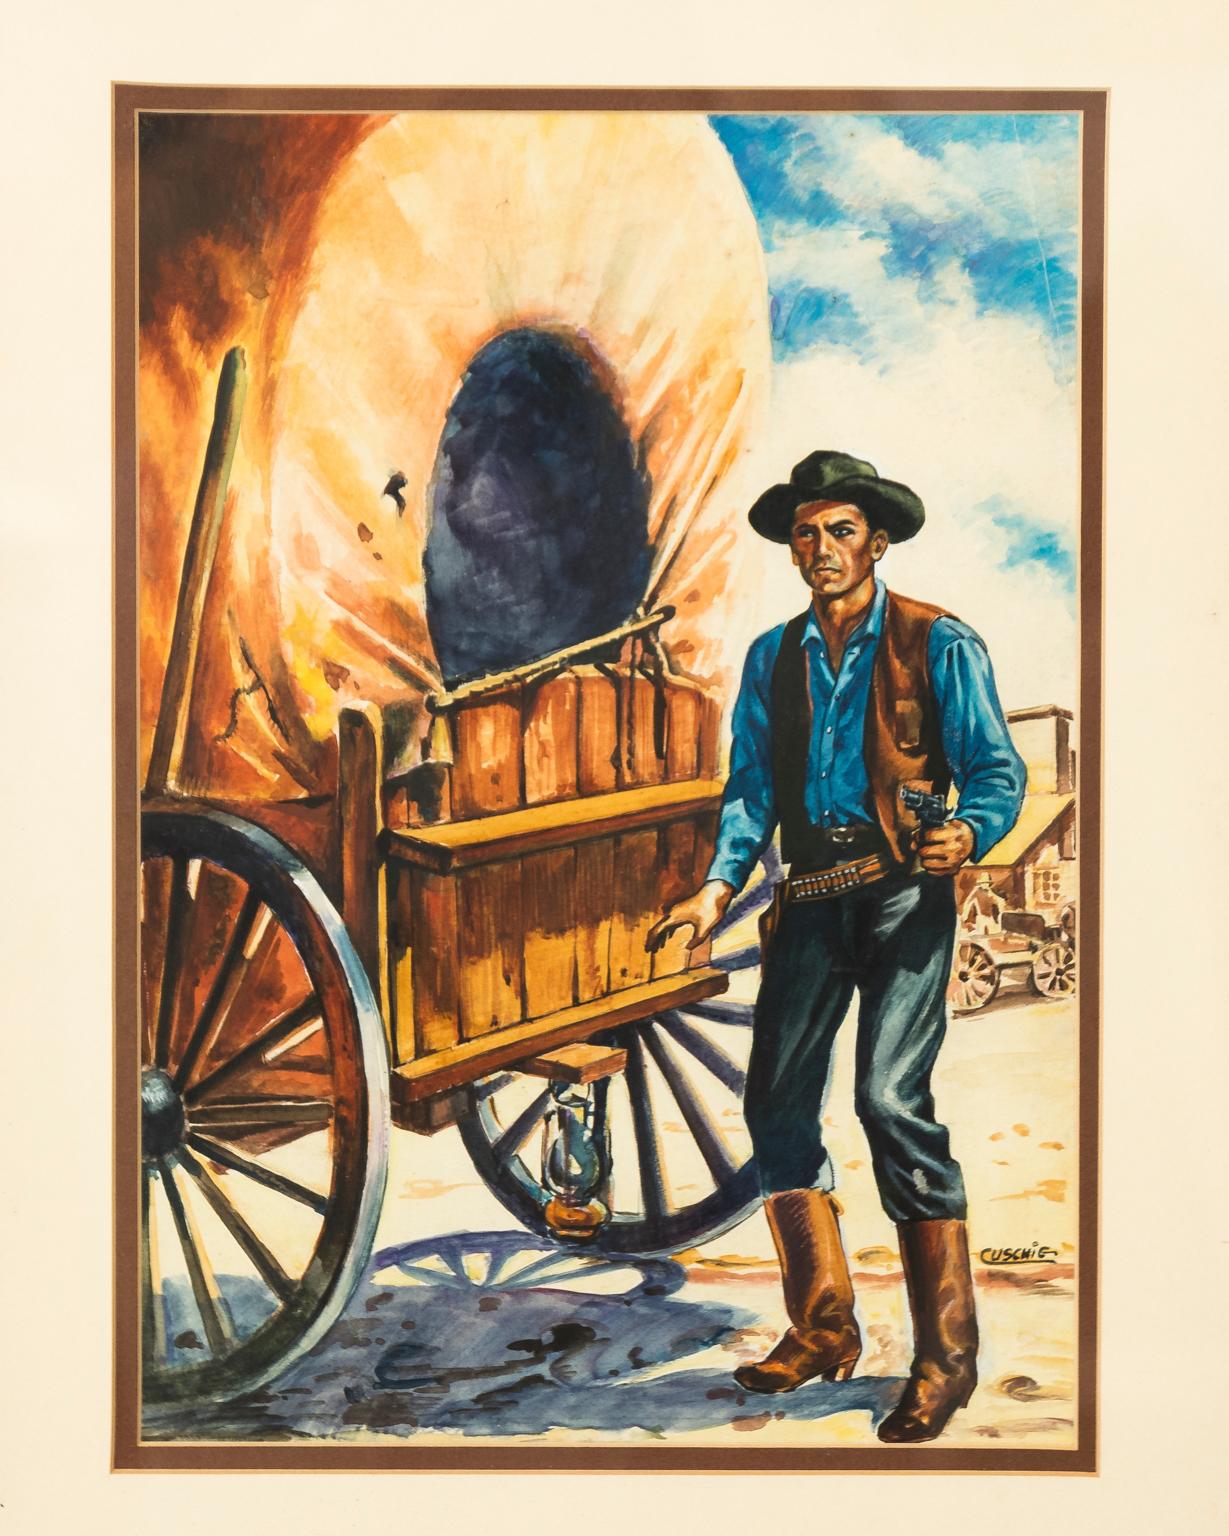 Painted Western Pulp Art Cover Illustration, Cuschiz For Sale